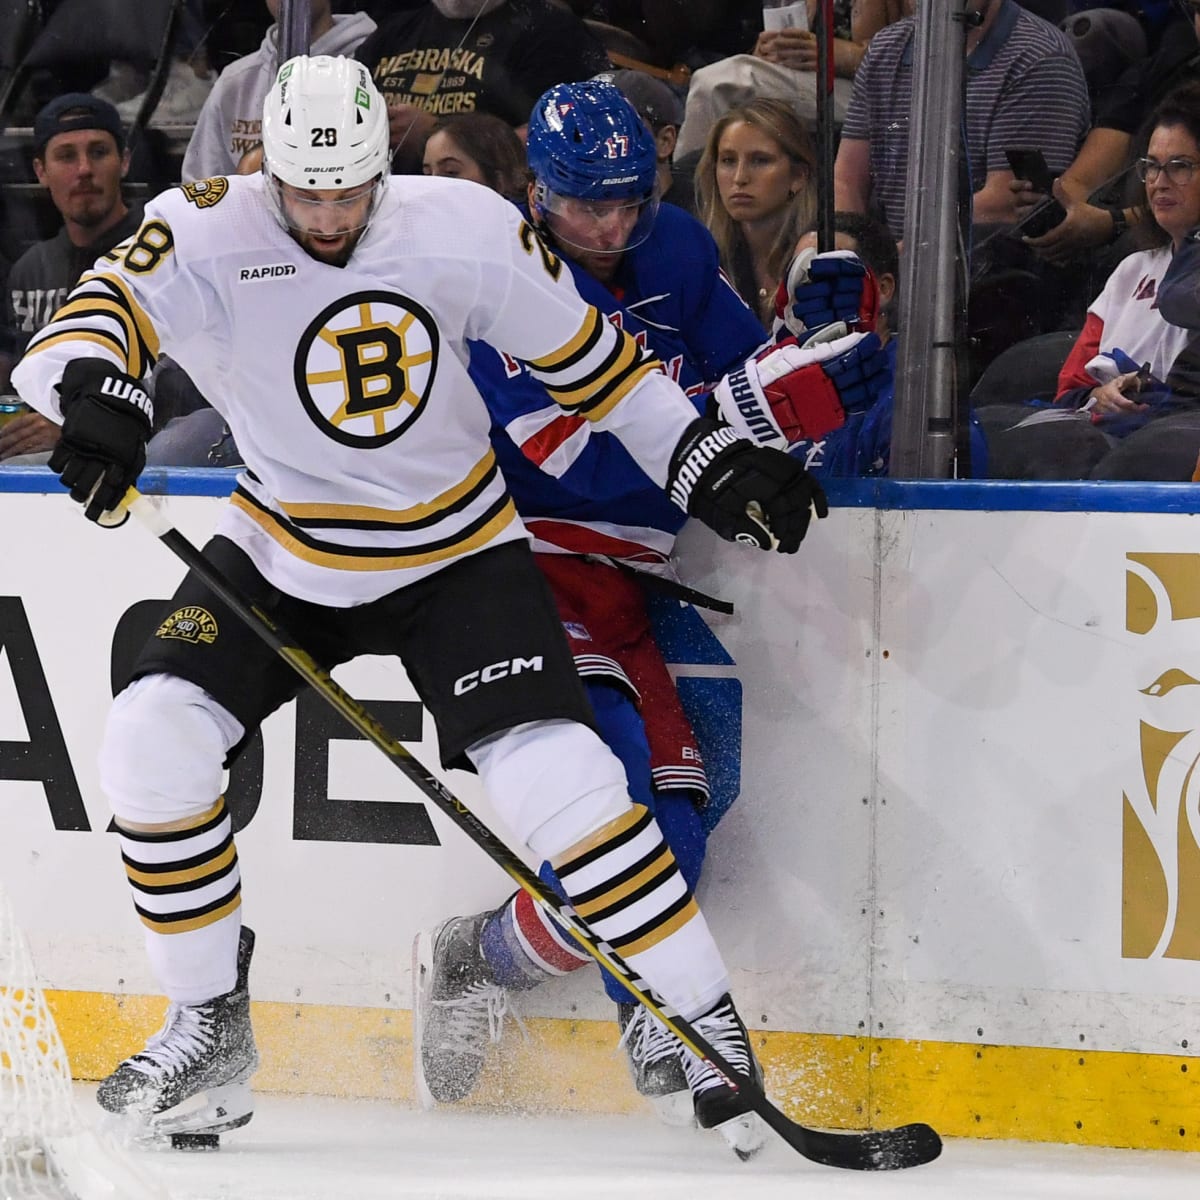 Expect A Full Season In The AHL For Bruins Prospect Trent Frederic